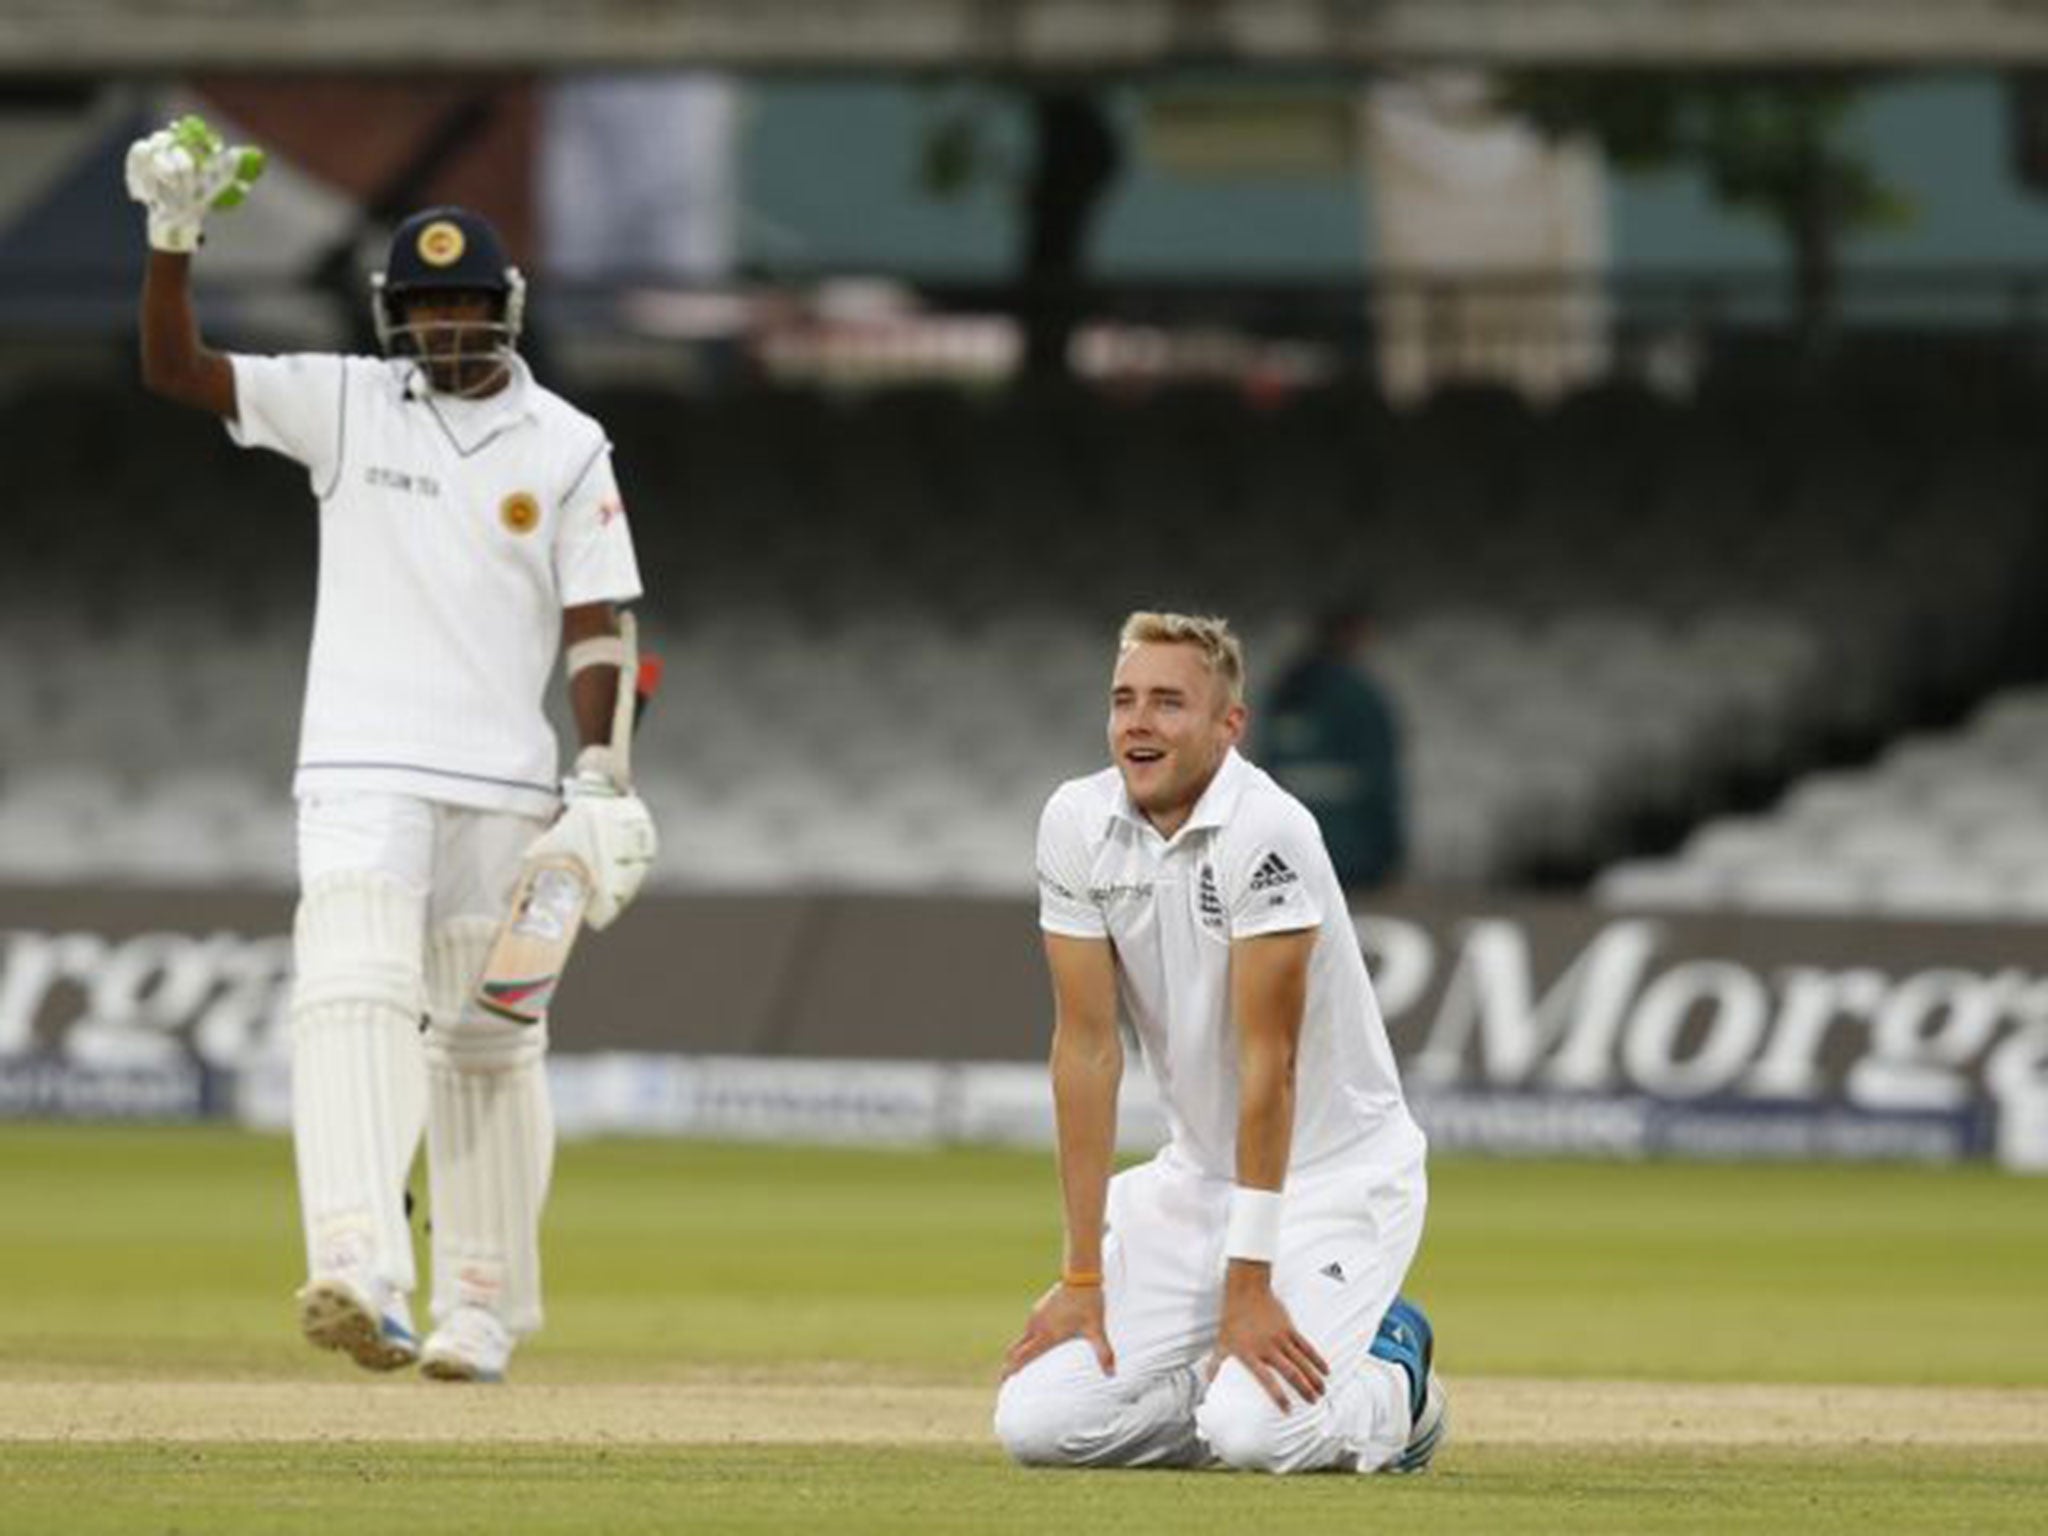 A dejected Stuart Broad sinks to his knees as England narrowly fail to take the last Sri Lanka wicket (AP)